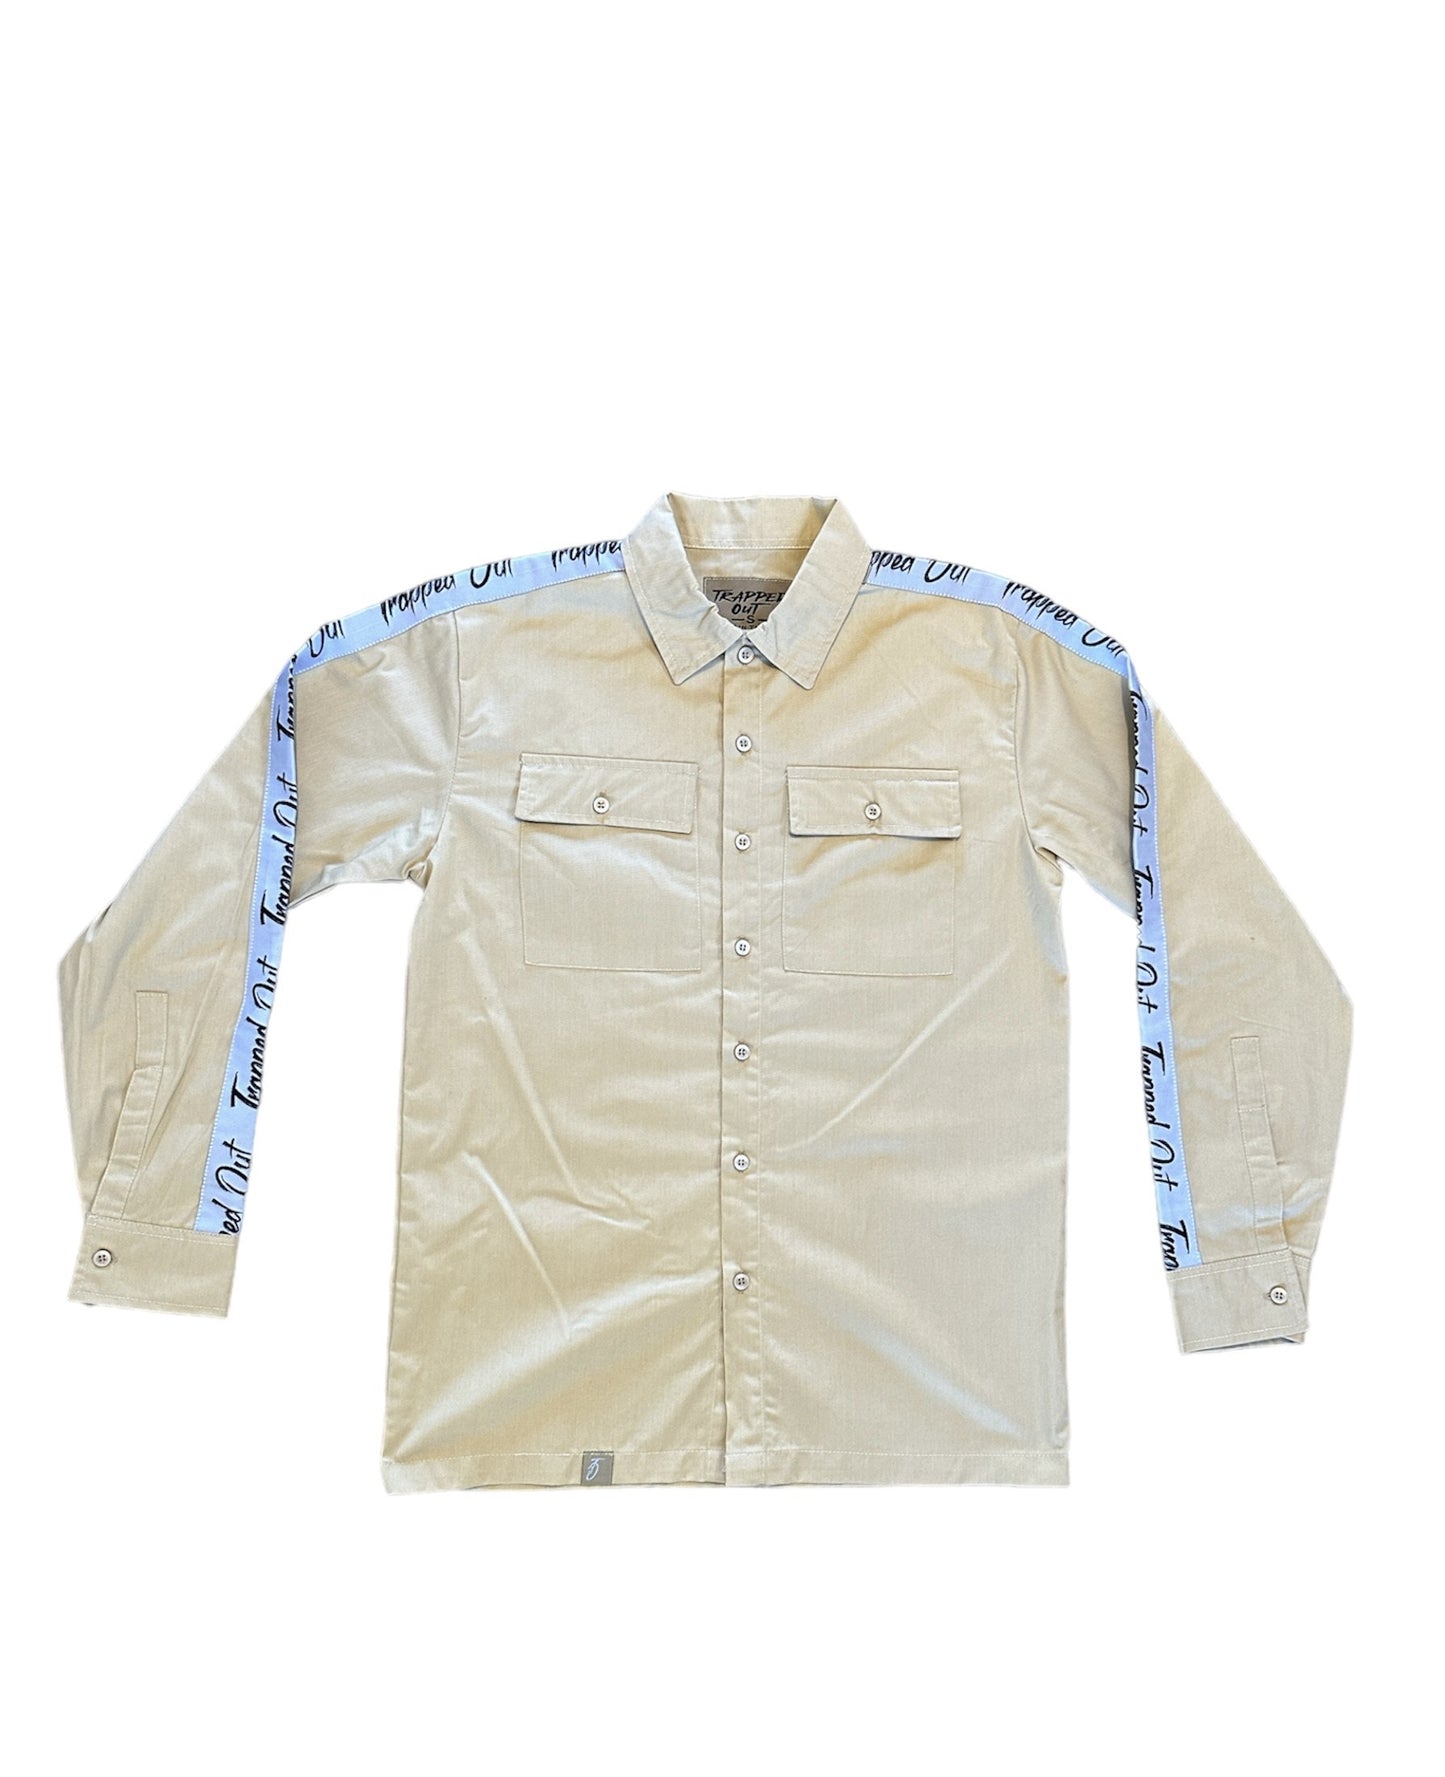 Khaki Long Sleeve Trapped Out Dickie Shirt